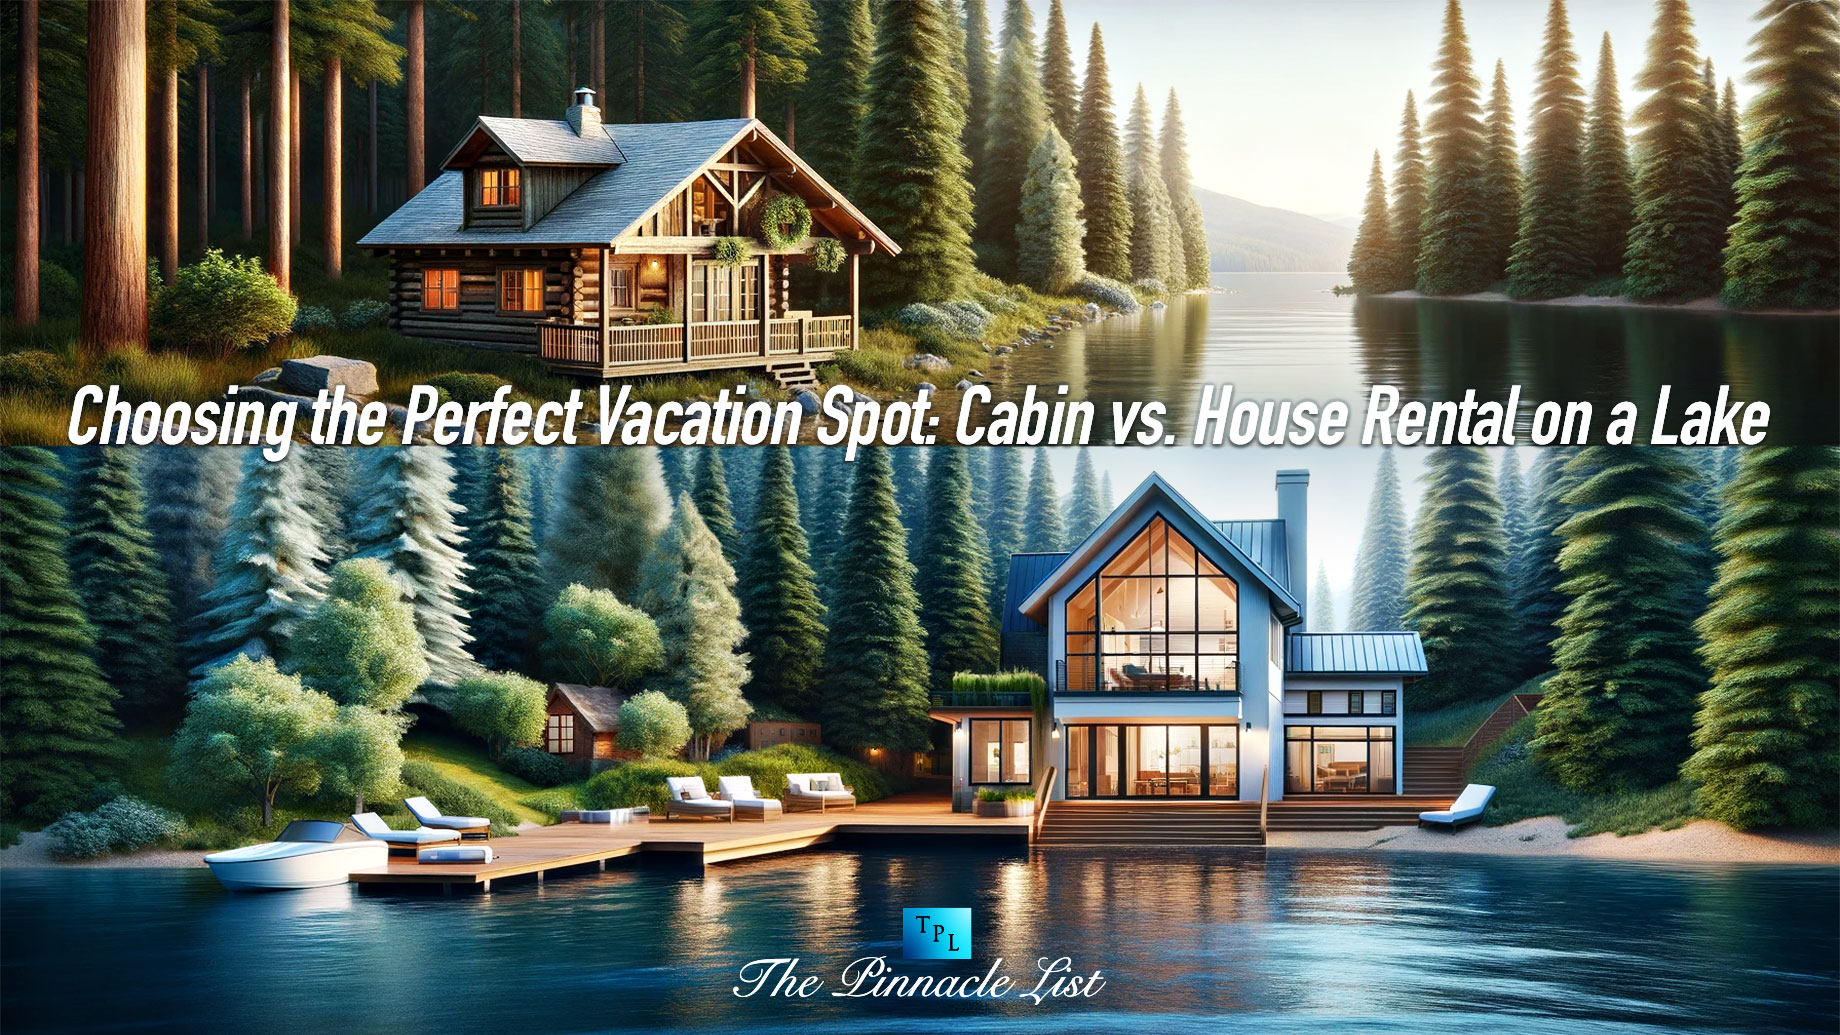 Choosing the Perfect Vacation Spot: Cabin vs. House Rental on a Lake